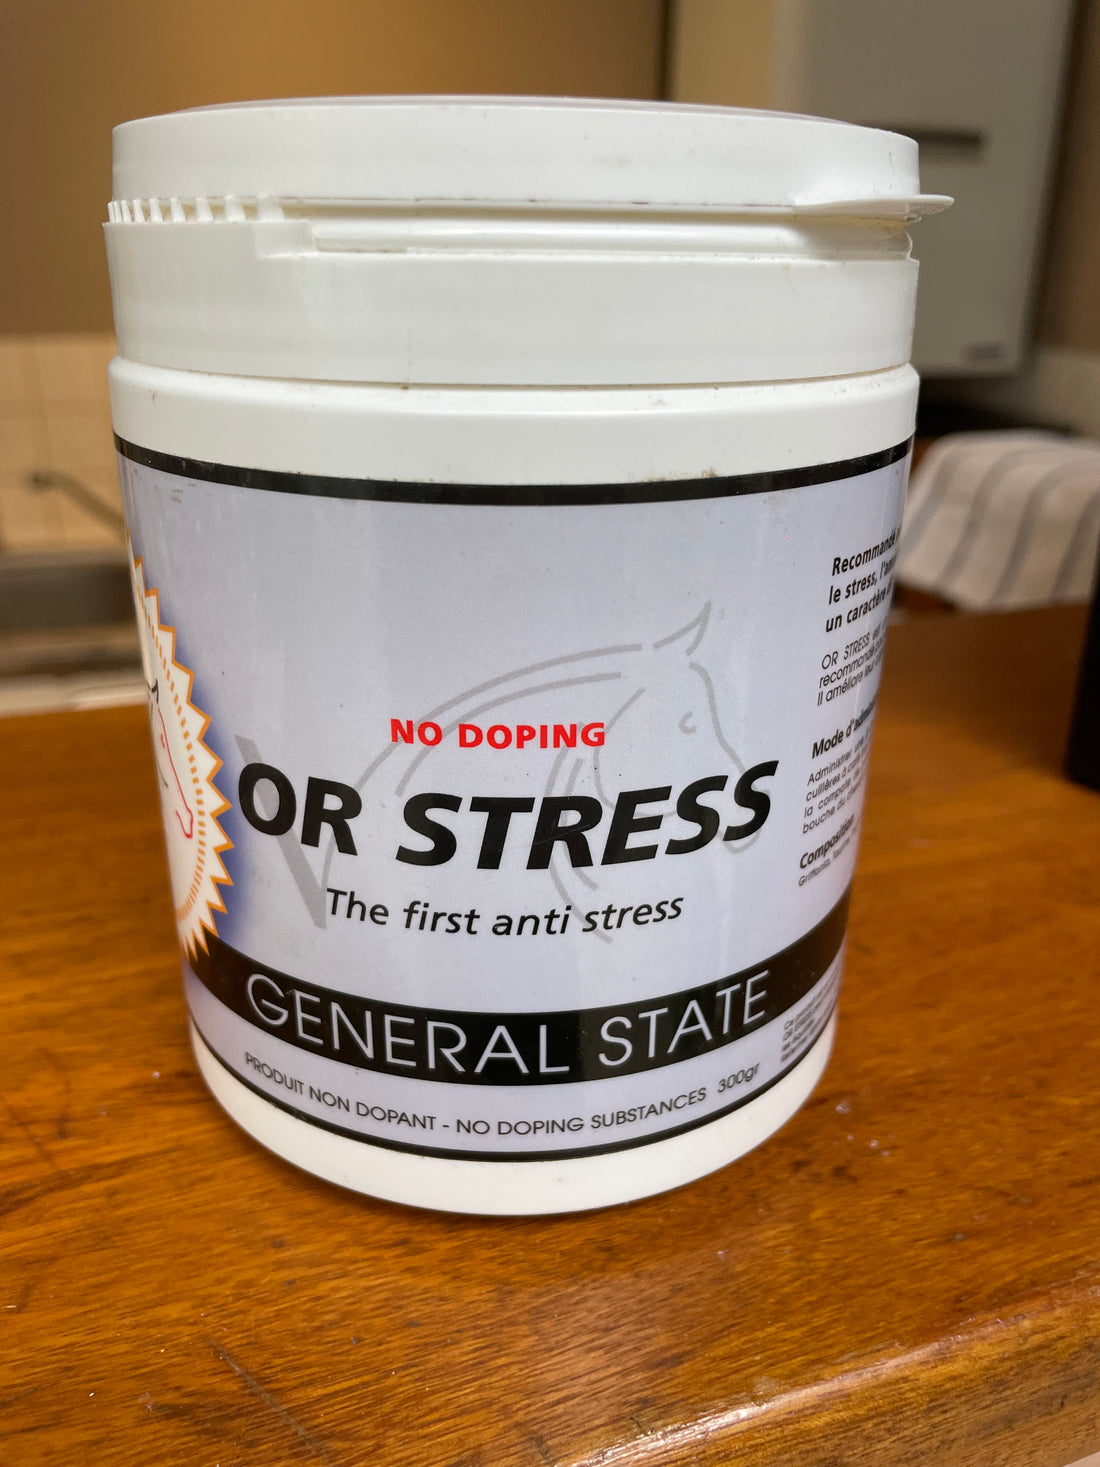 OR STRESS - NO DOPING SUBSTANCES